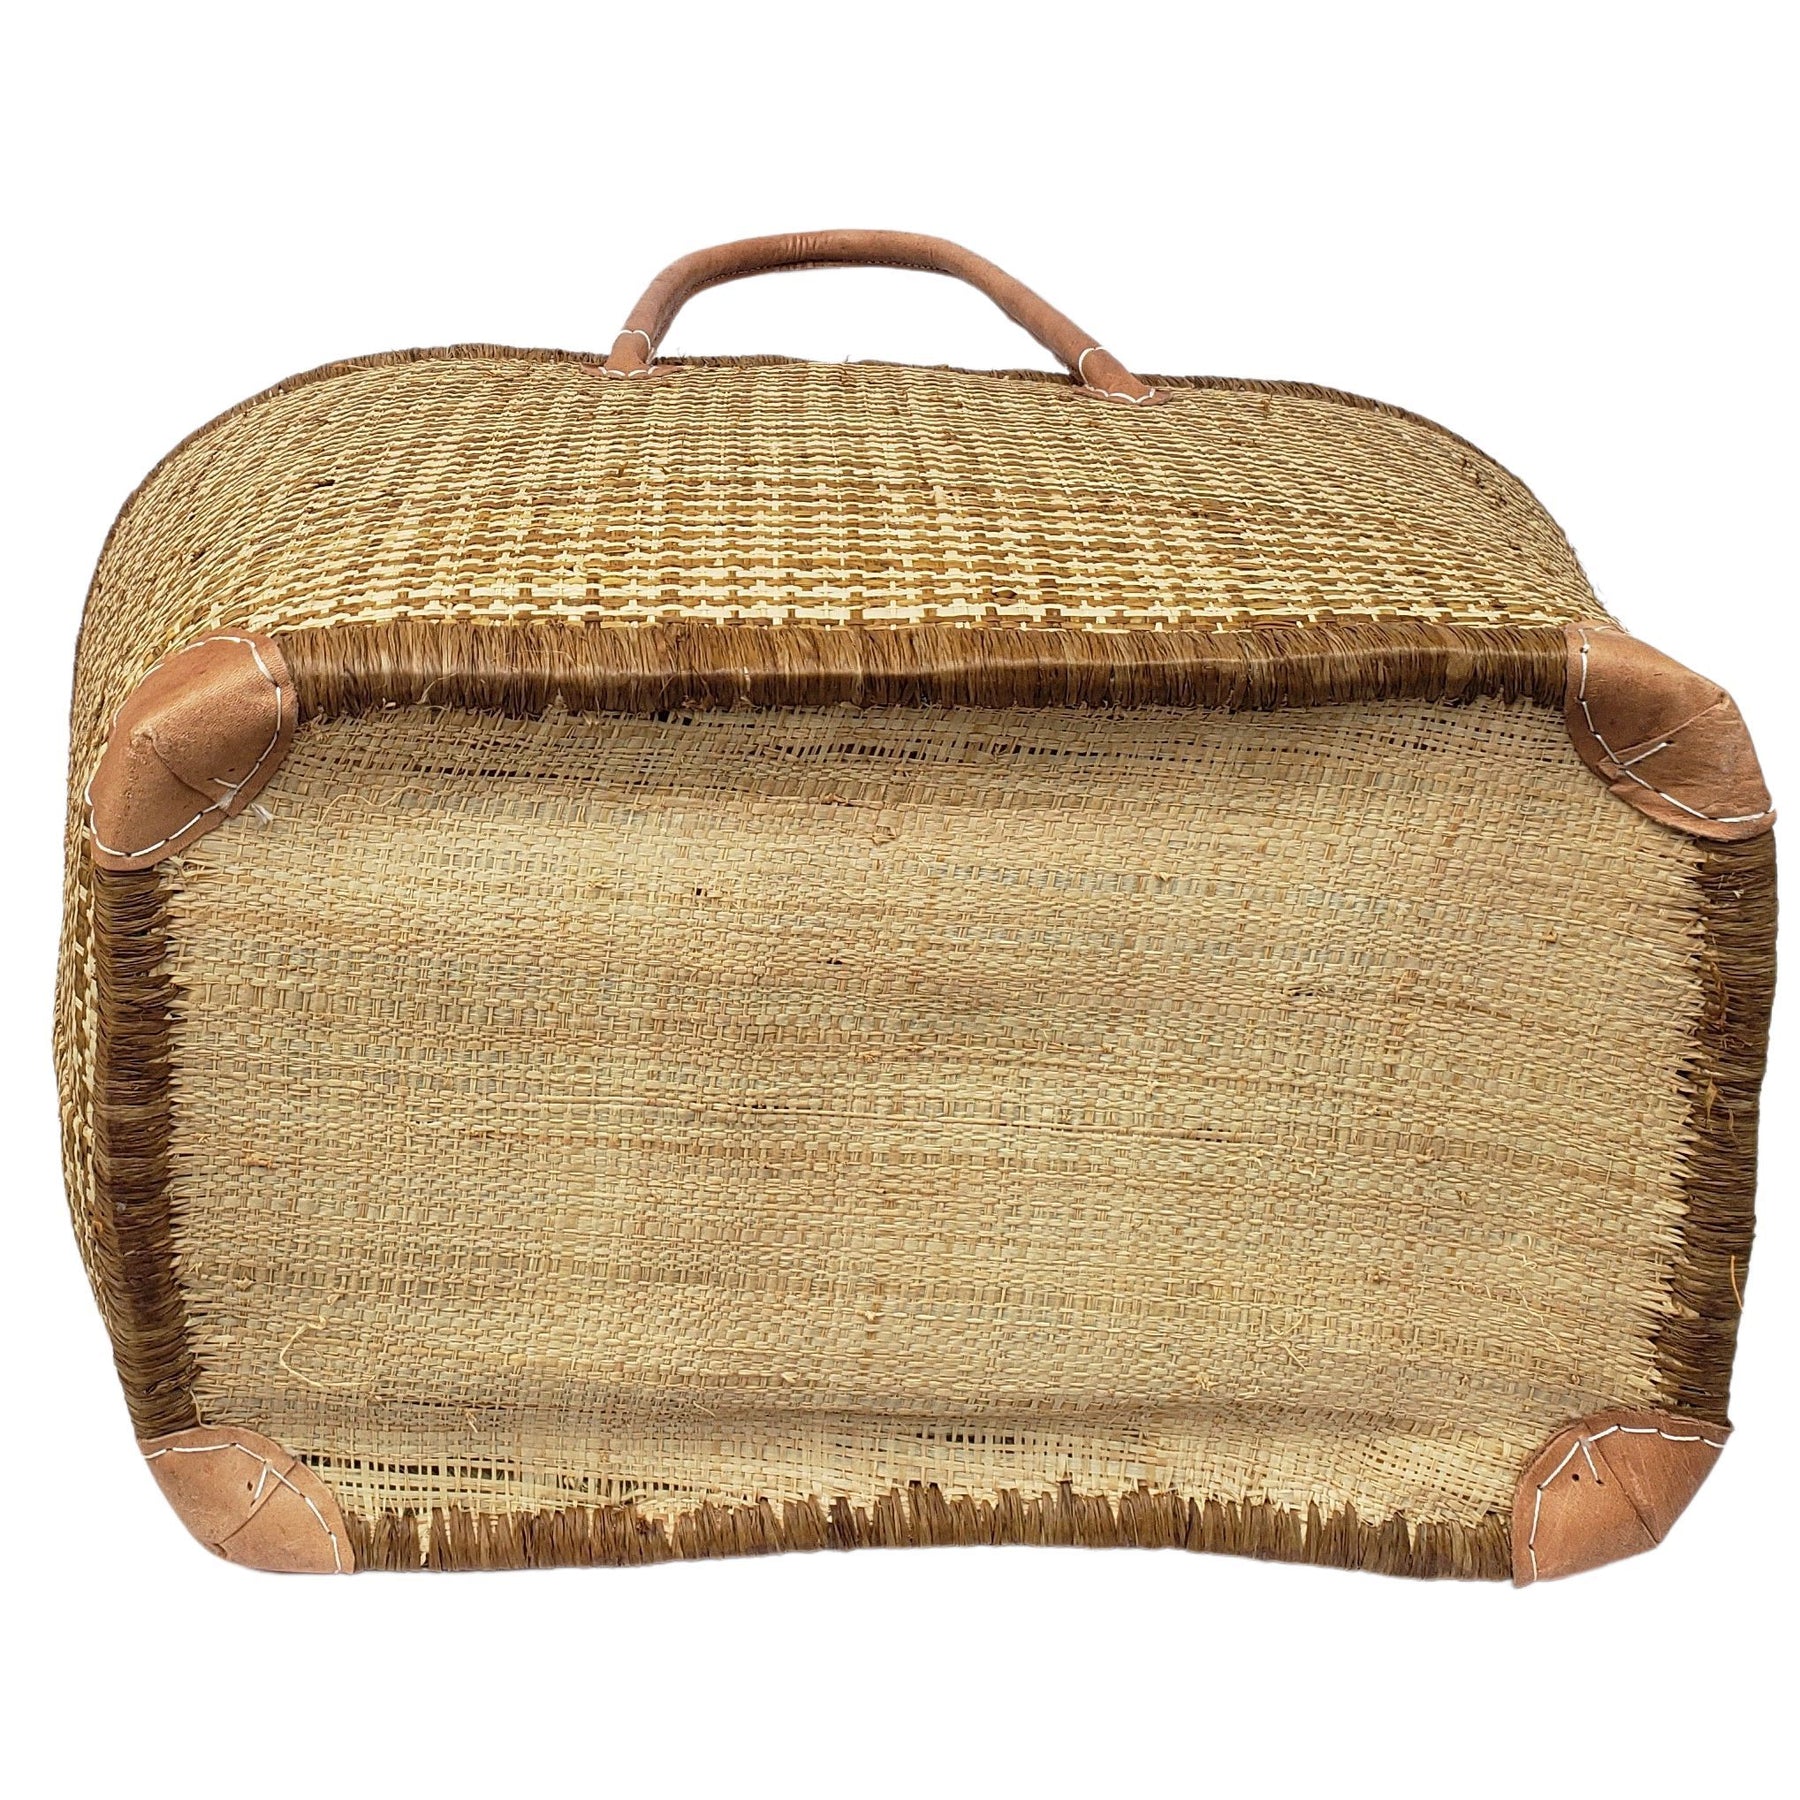 48 of 59: Adjanie: Authentic Madagascar Raffia and Leather Tote Bag (Natural and Brown)